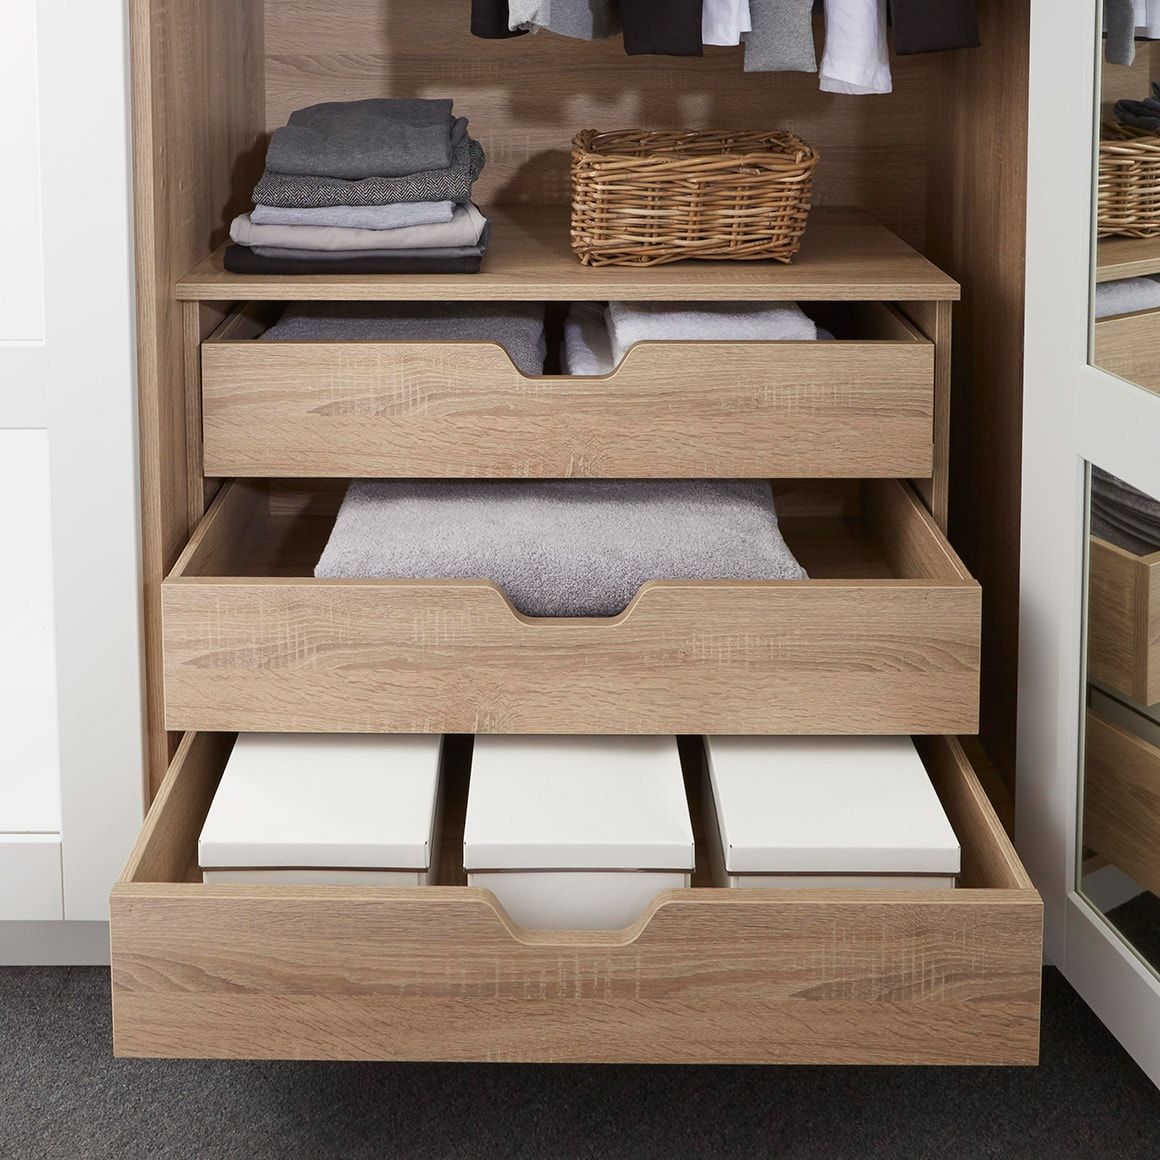 Wardrobe Storage Solutions Ireland | The Panelling Centre Intended For Oak Wardrobes With Drawers And Shelves (View 15 of 15)